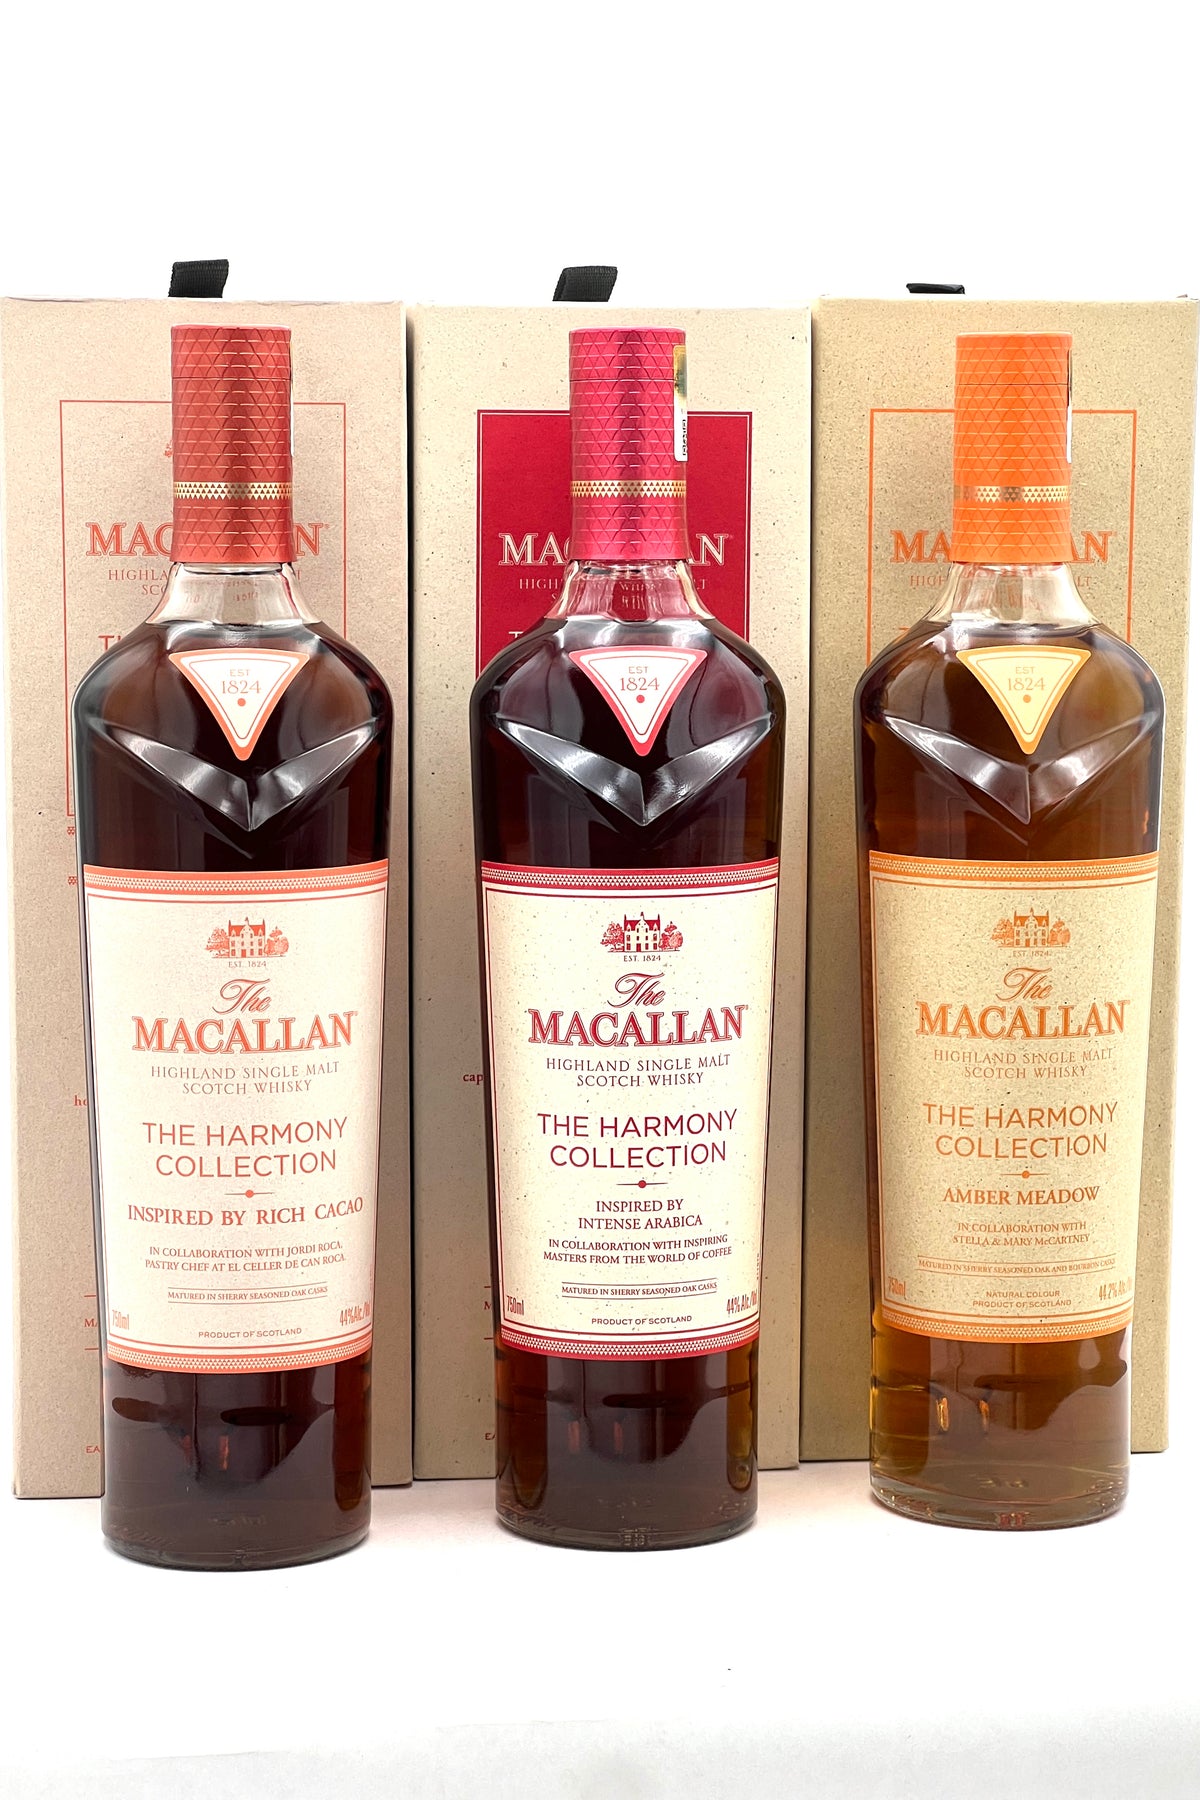 The Macallan &quot;The Harmony Collection&quot; 3 Bottle Set Single Malt Scotch Whisky 3 x 750 ml